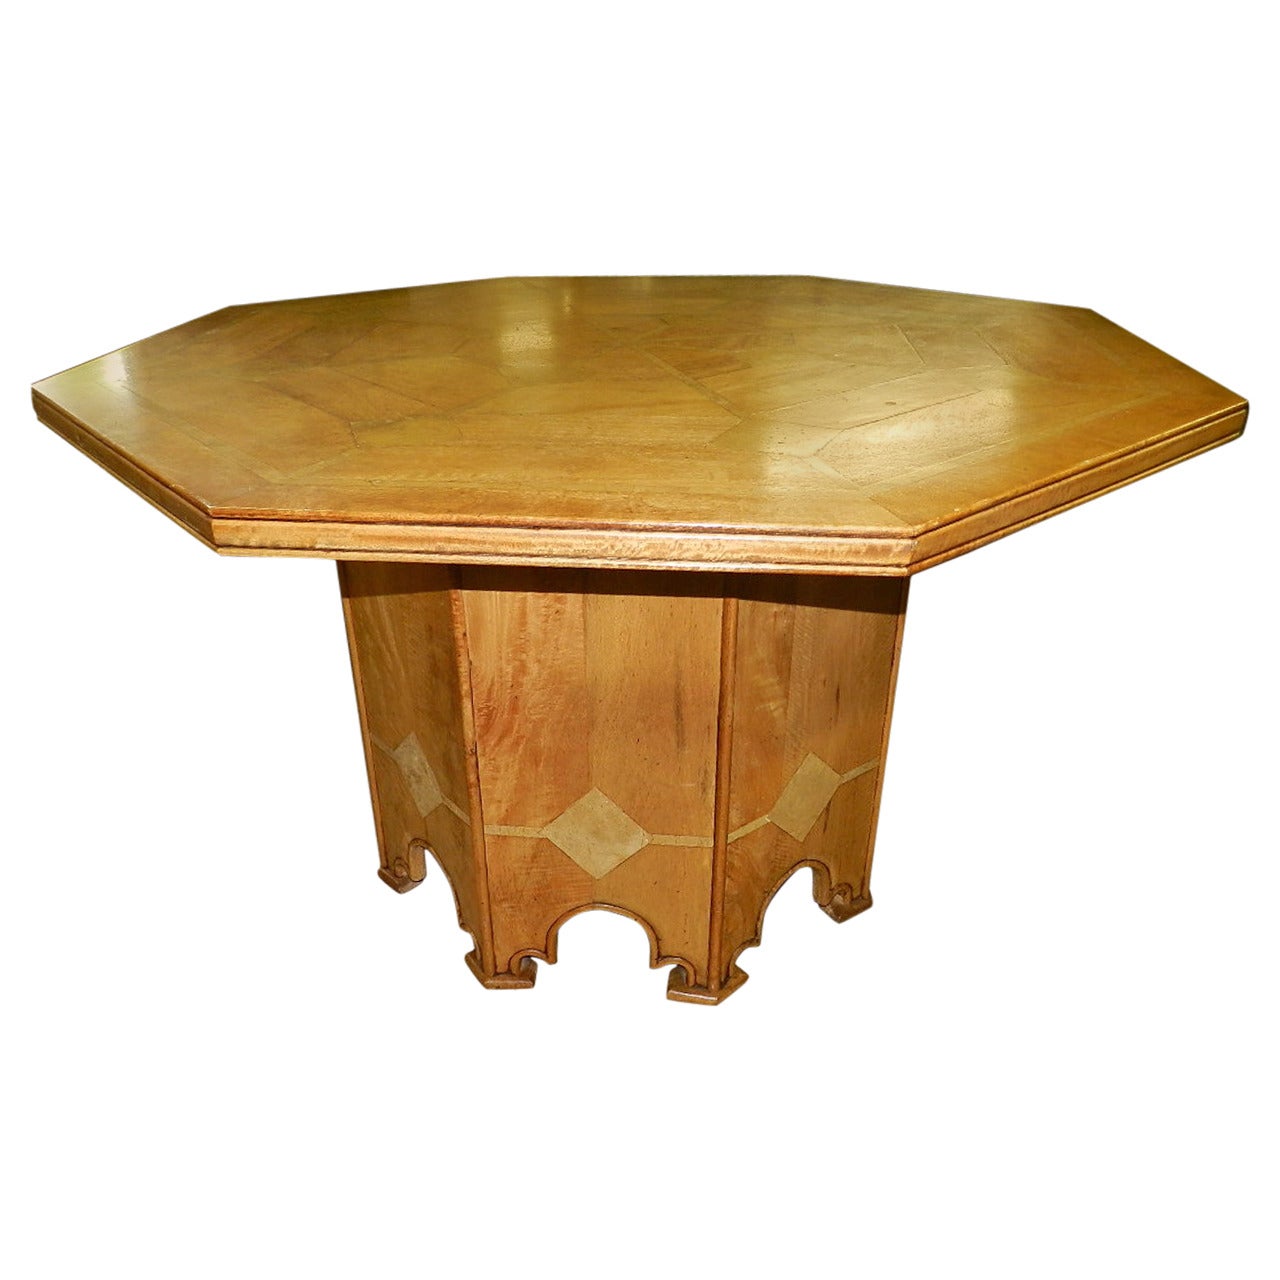 Octagonal Mahogany Table with Inlaid Marble